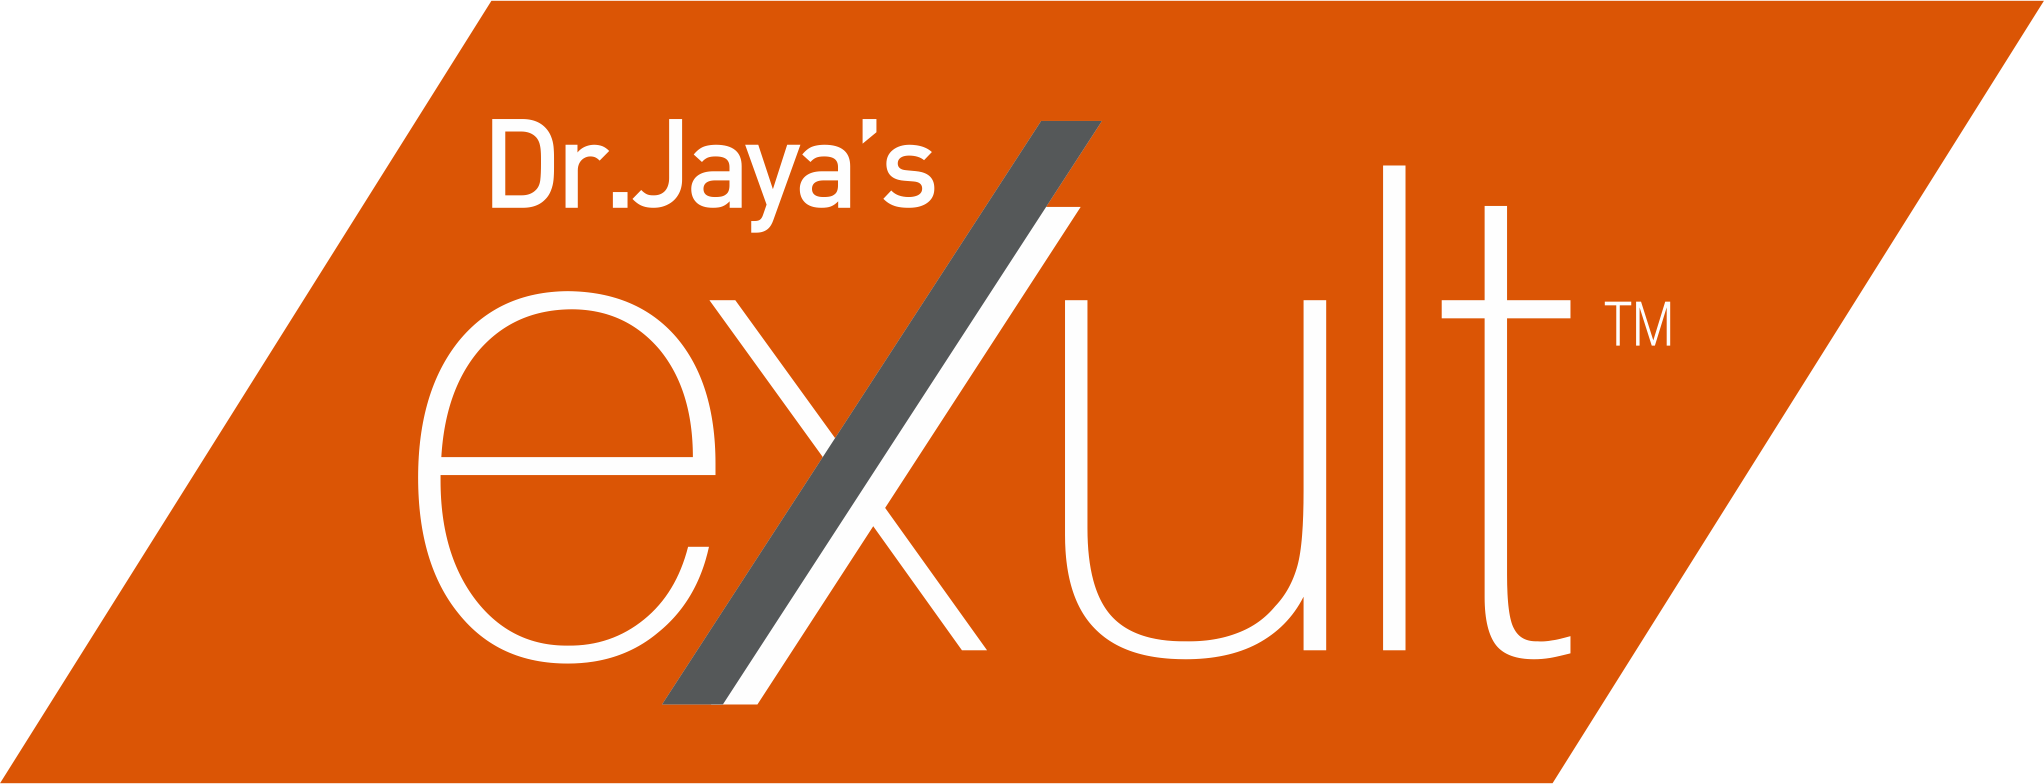 Sign Up And Get Special Offer At Exult Cosmetics